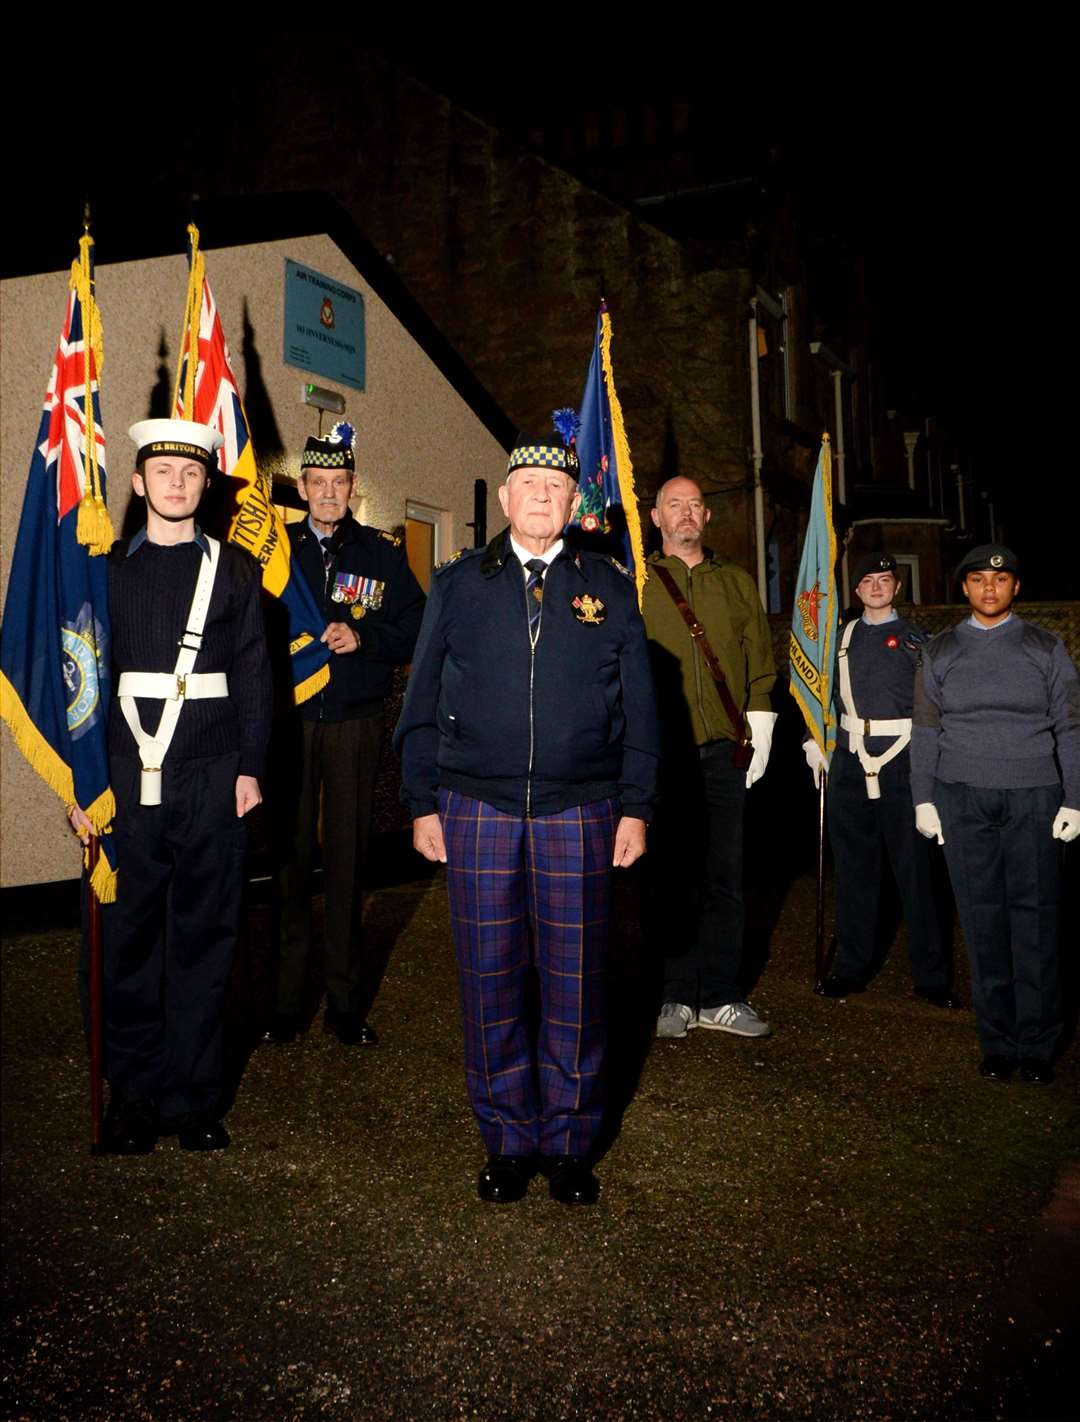 Members of the Inverness RBLS and cadets prepare for Remembrance Sunday.